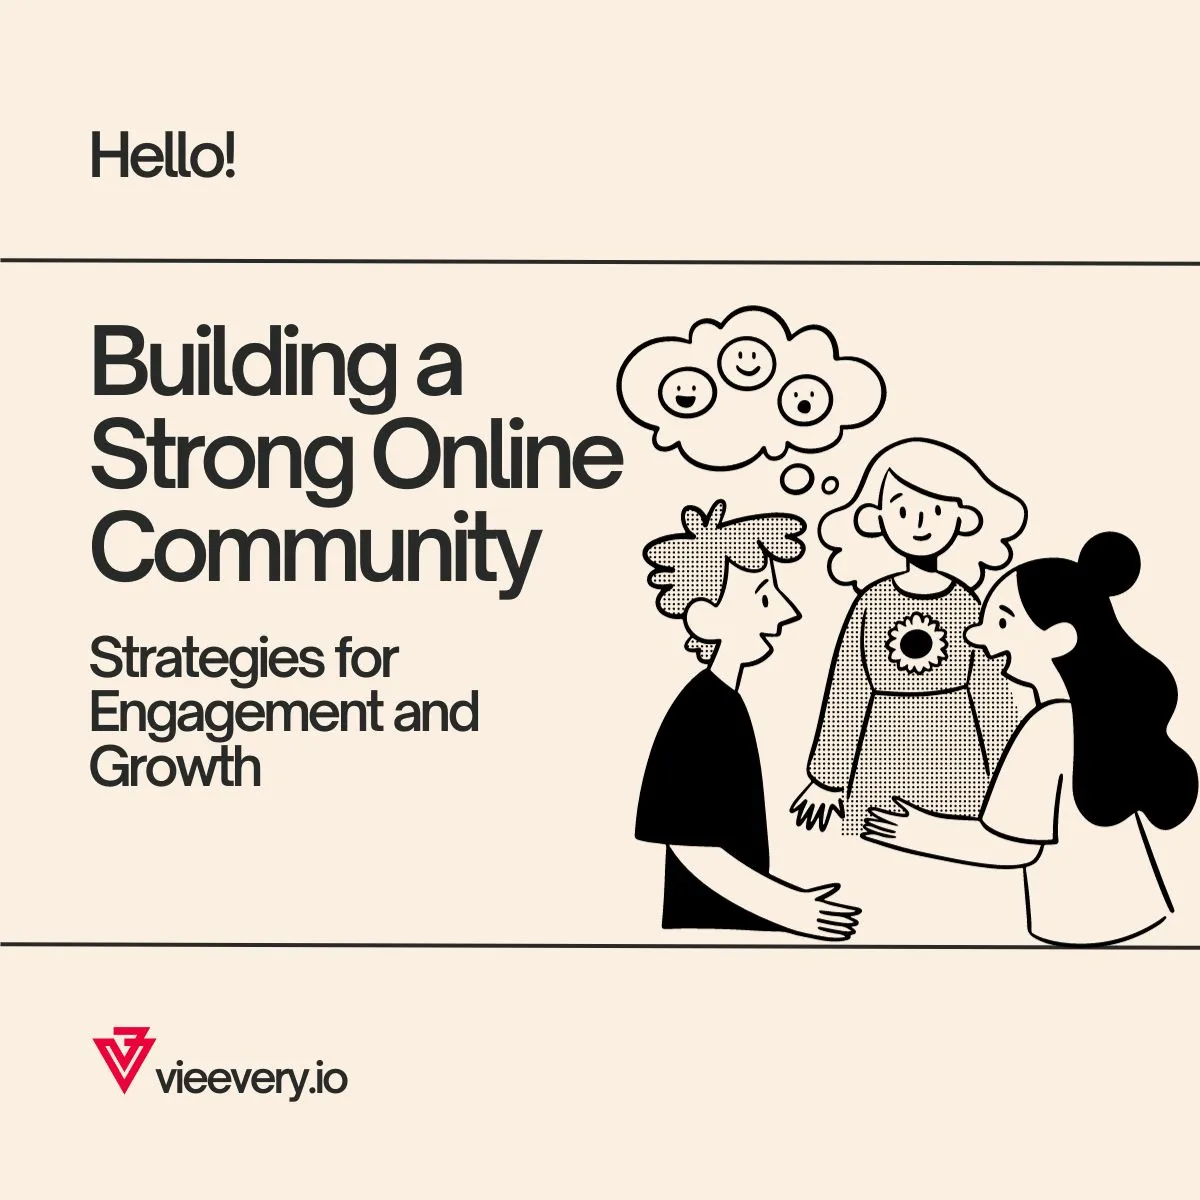 Building a Strong Online Community: Strategies for Engagement and Growth